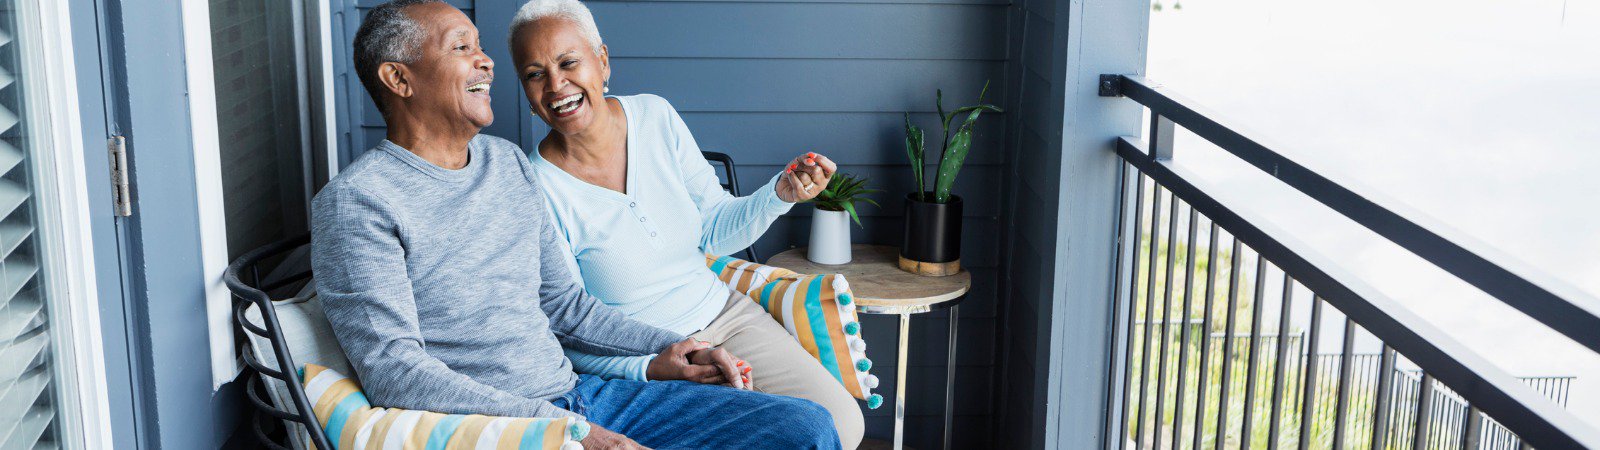 senior-couple-sitting-on-porch-holding-hands-laughing